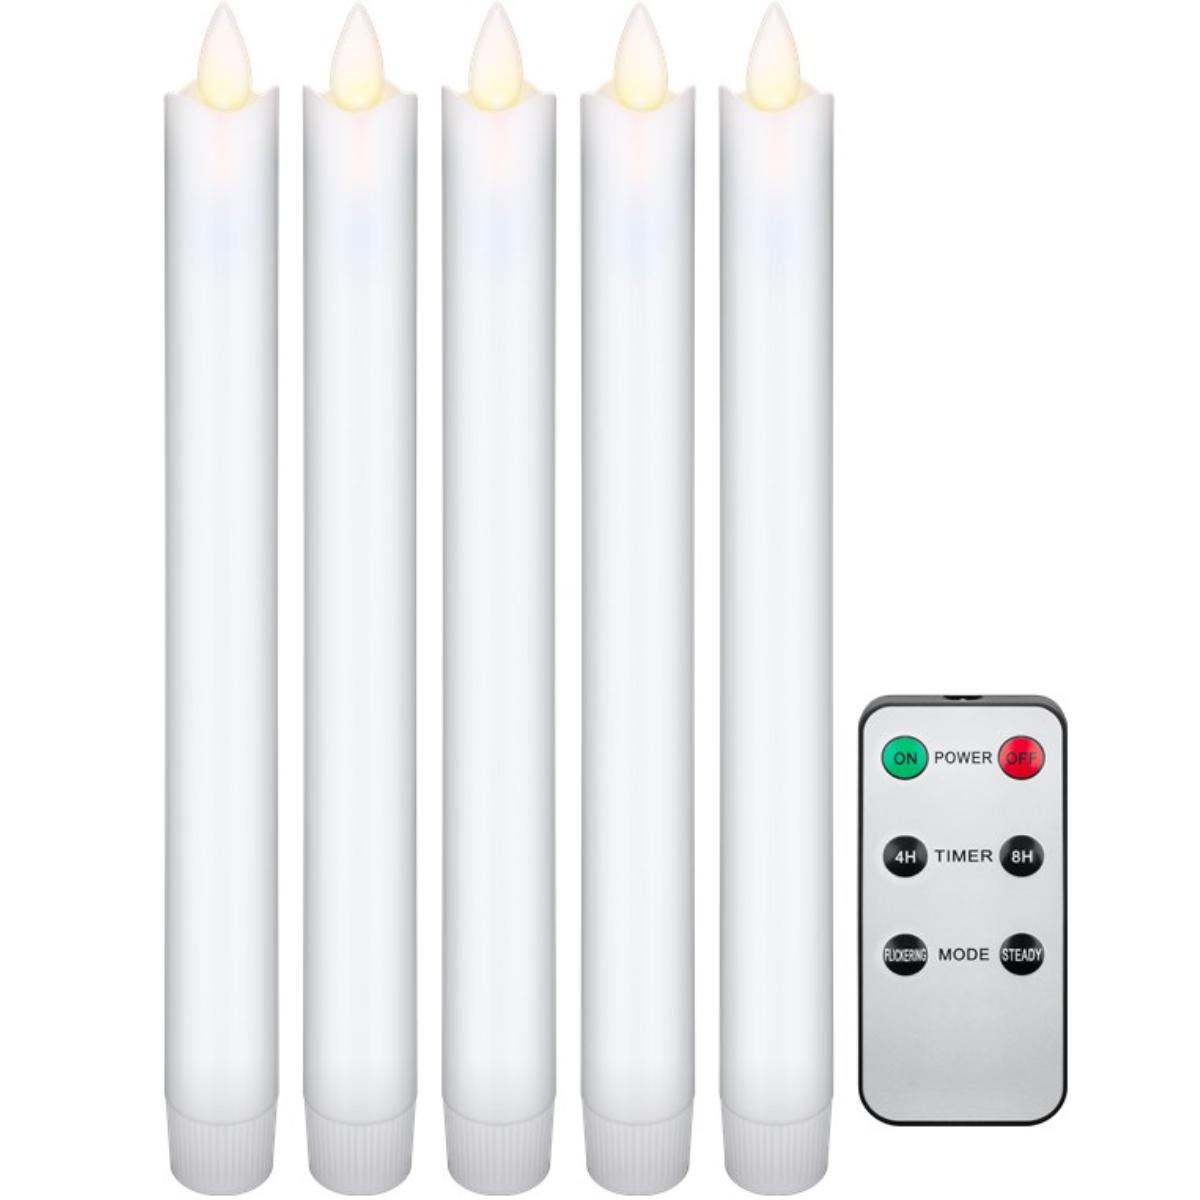 Set of 5 white LED real wax rod candles, incl. remote control beautiful - Goobay